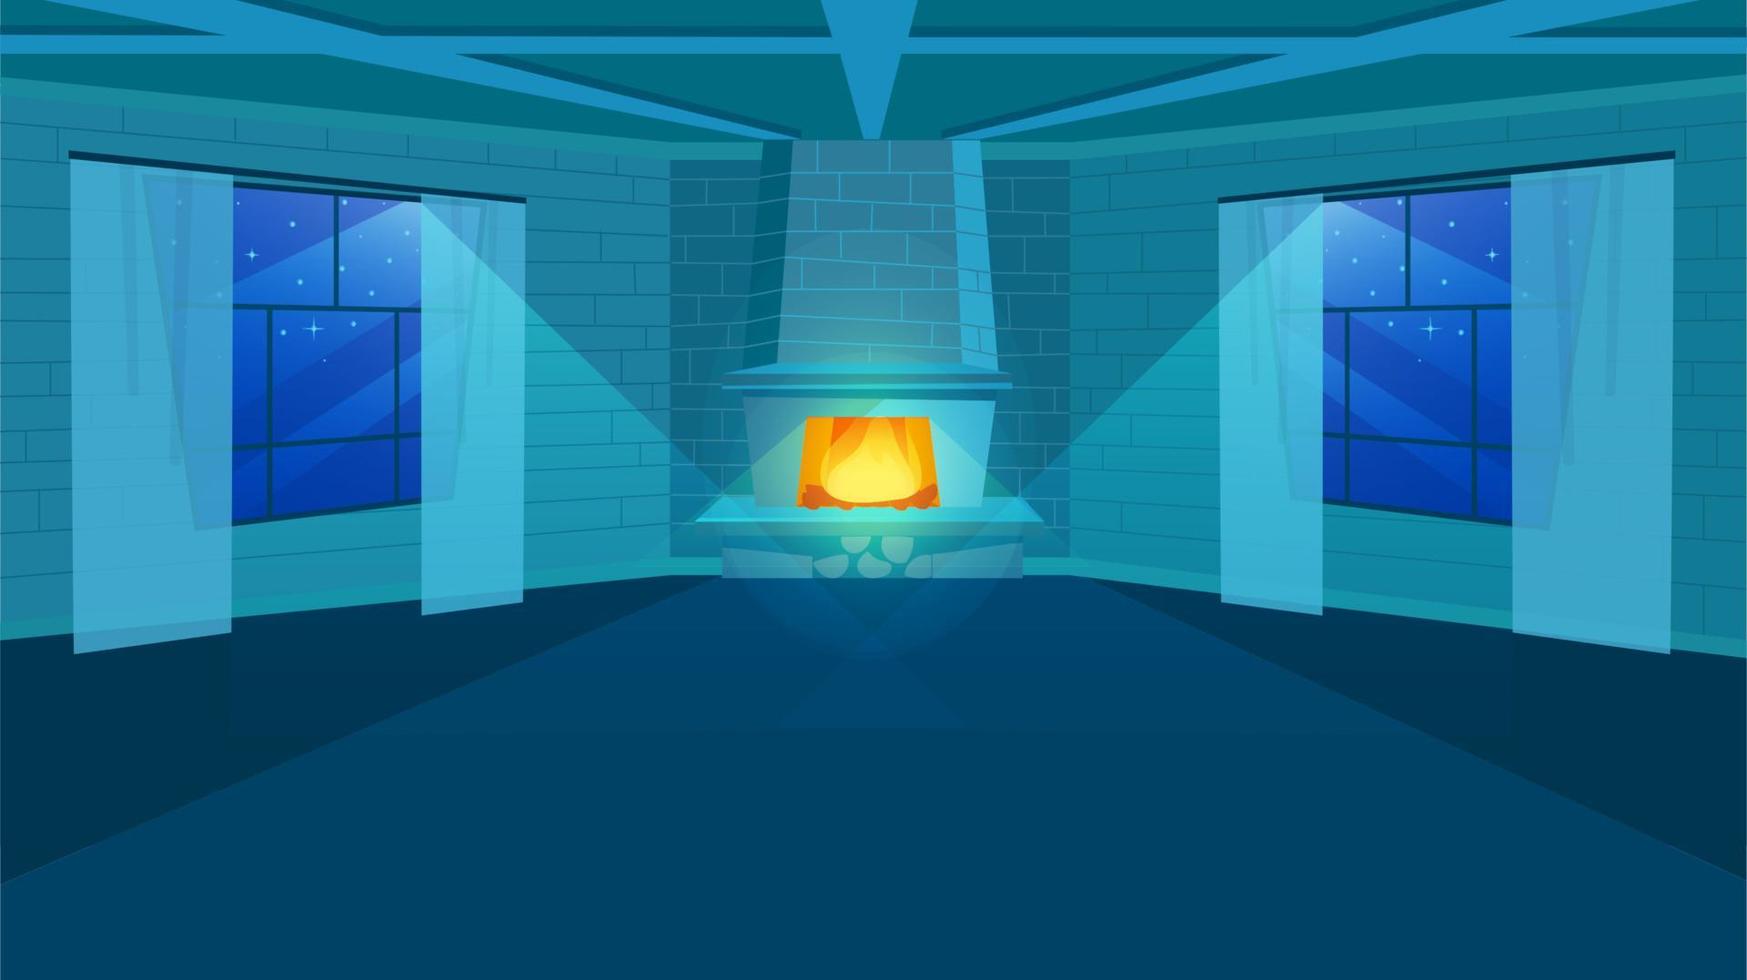 Fireplace in room flat vector illustration. Stylized brick wall in interior design. Empty living room with big windows and curtains. New house, modern architecture concept. Stars in dark blue sky